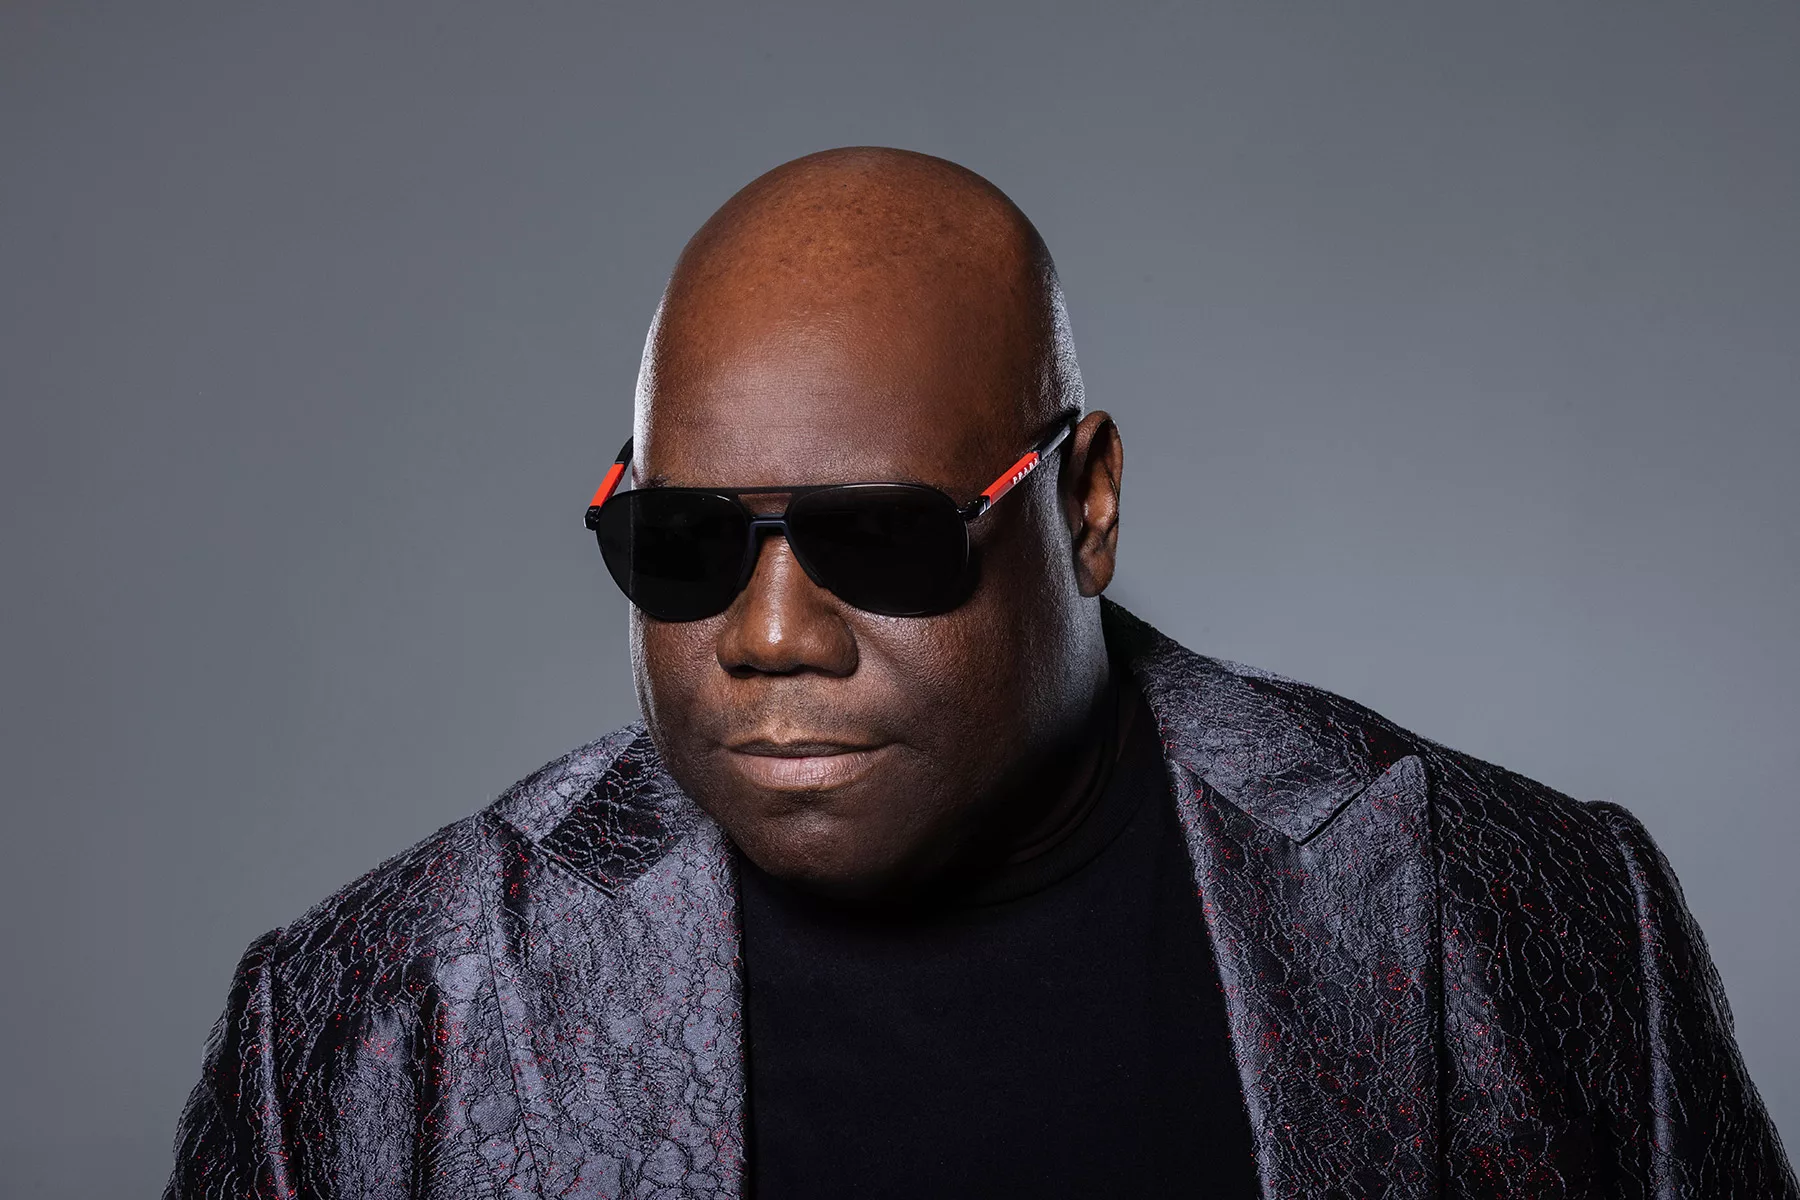 Space Riccione confirms the return of Carl Cox for opening party